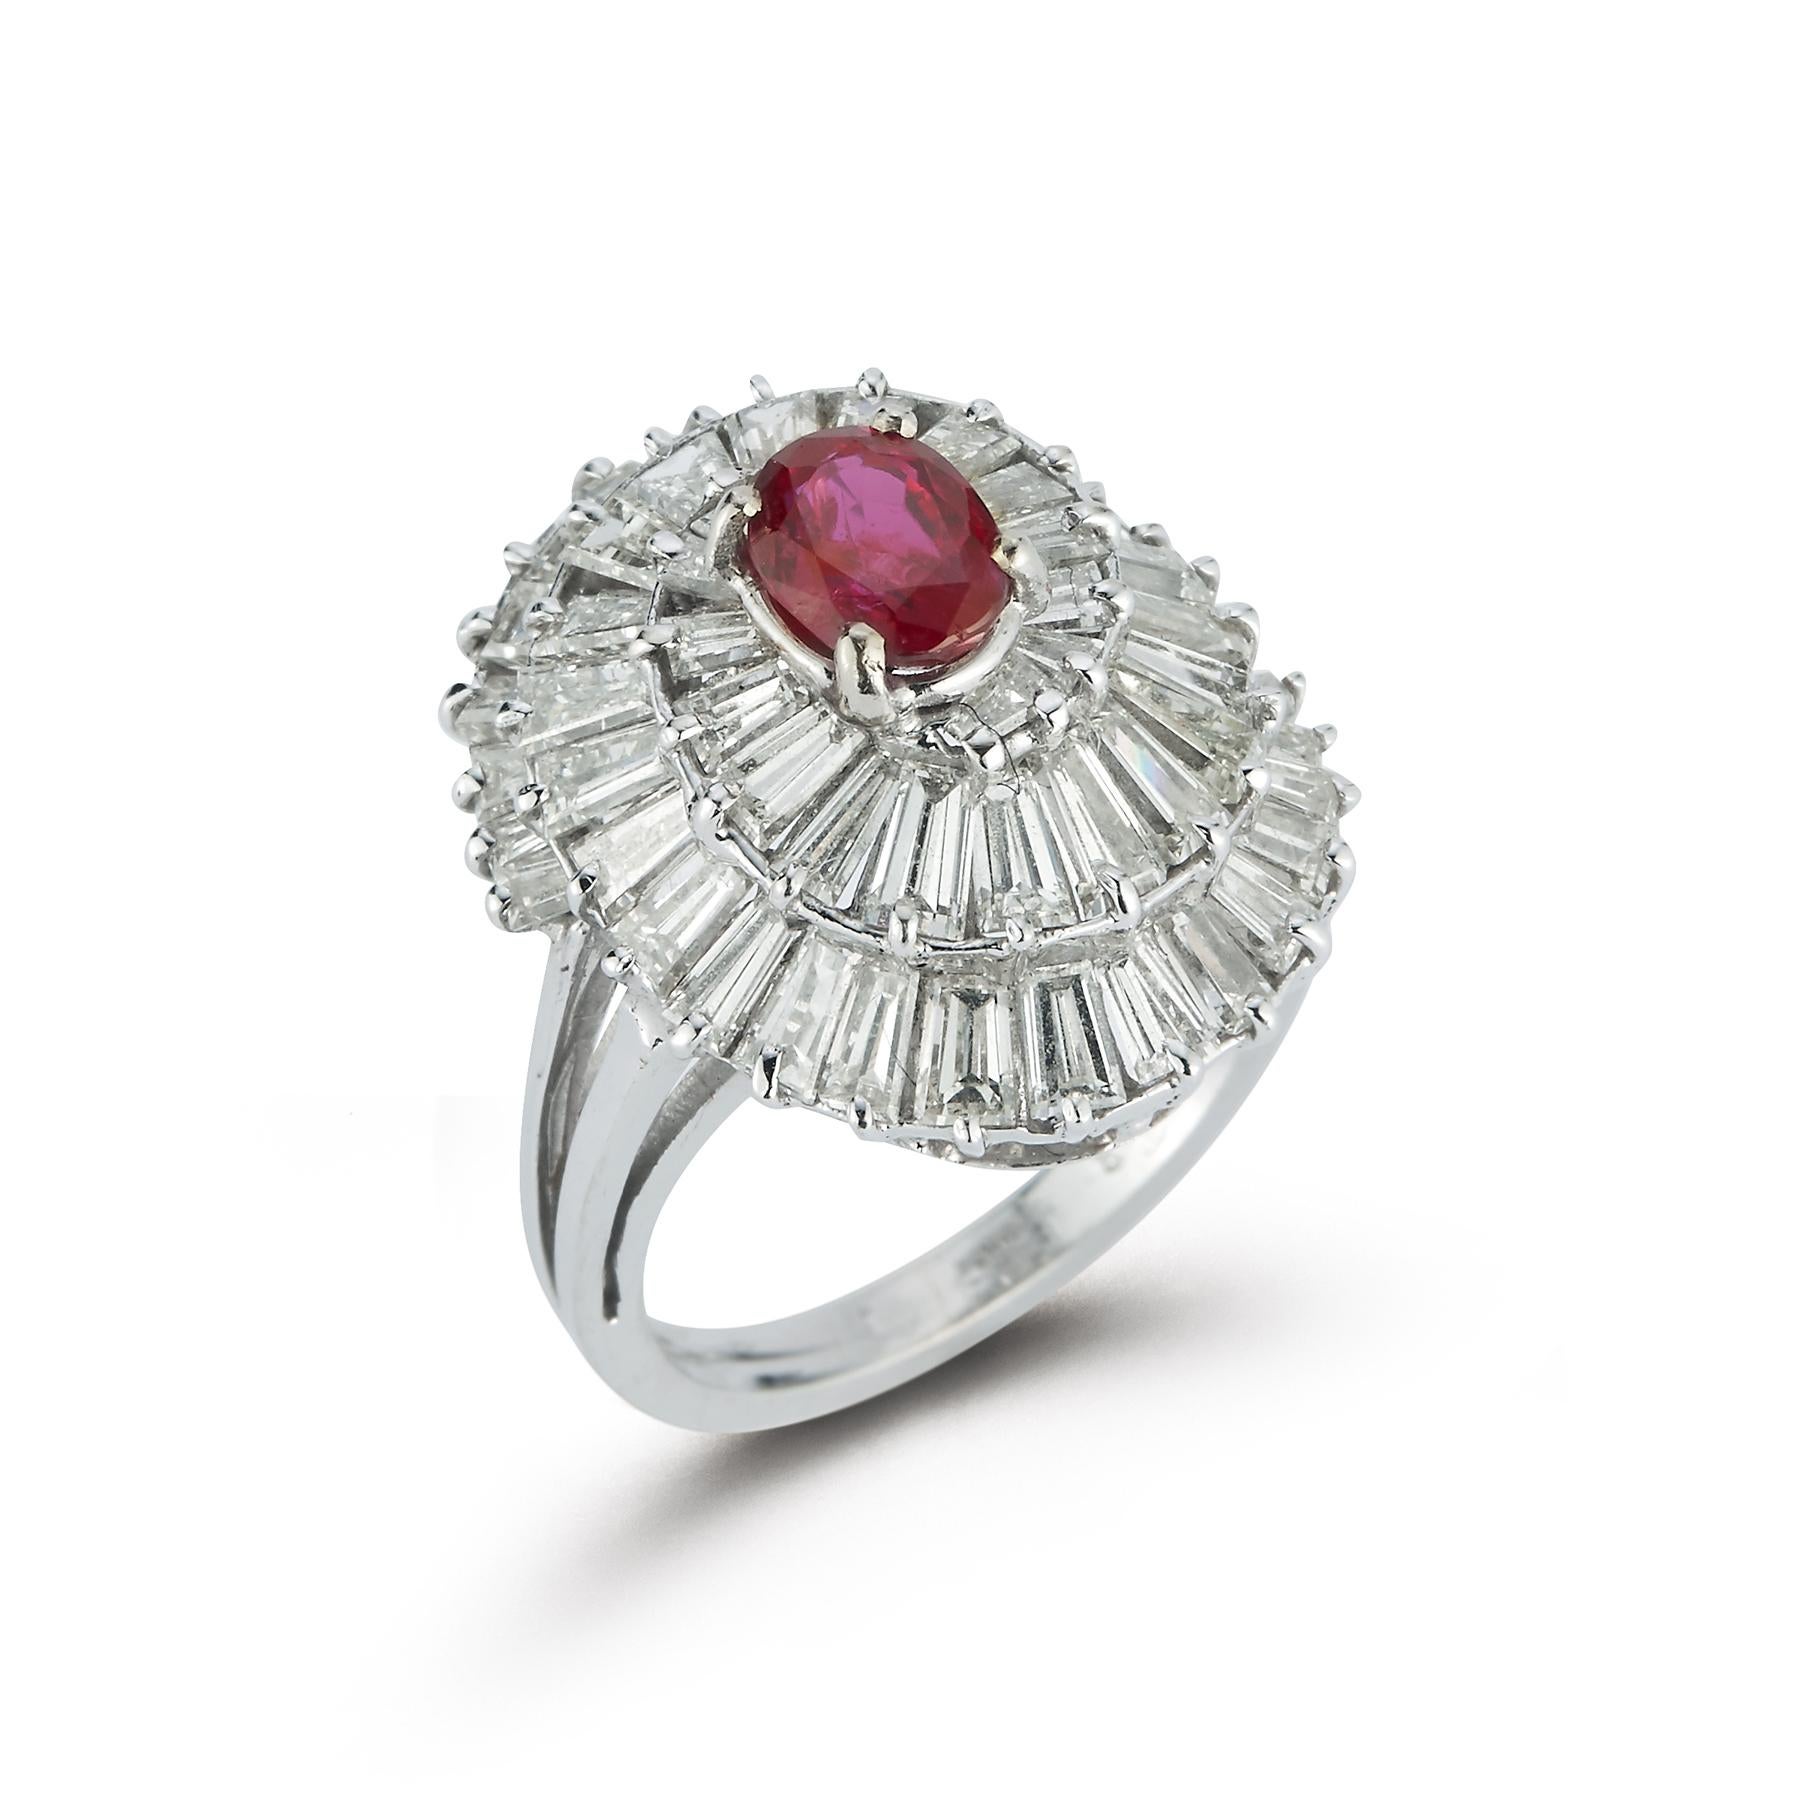 Ruby & Diamond Ballerina Cocktail Ring
Center Oval Ruby approximately .94 Carat,
Surrounded by a Beautiful Array of Baguette Diamonds approximately 3.75 cts

Ring Size 5.25

Resizable Free of Charge

Gold Type: 14K White Gold 